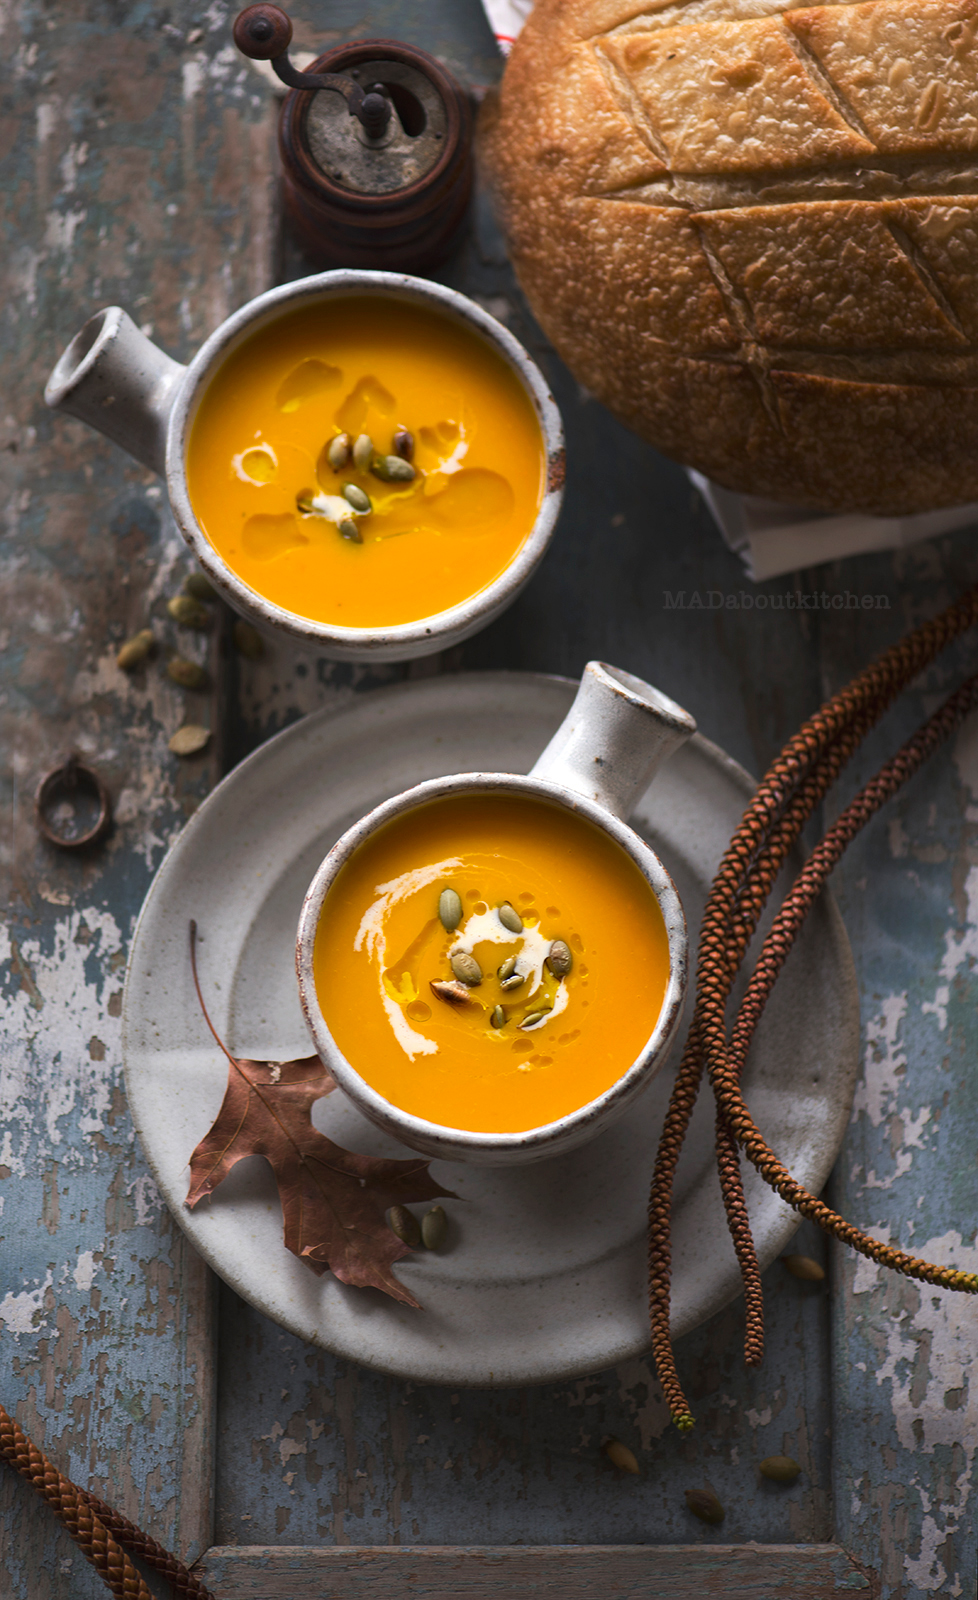 Pumpkin Soup is one of the most common, most basic soups that is made at home.Pumpkin Soup is creamy, thick, smooth and filling.